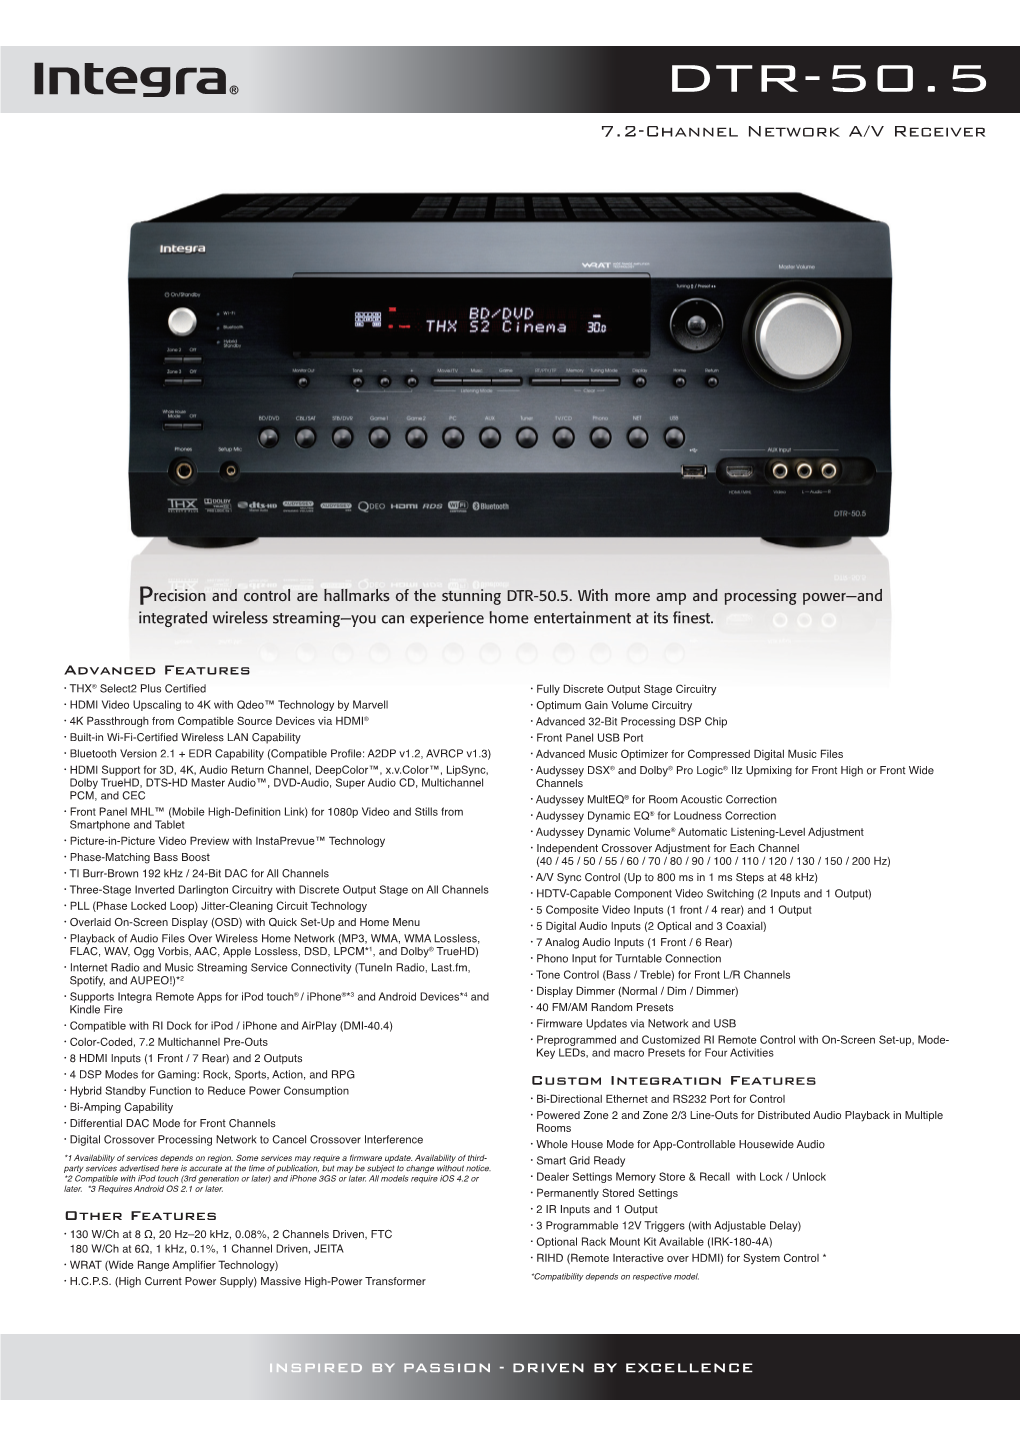 DTR-50.5 7.2-Channel Network A/V Receiver